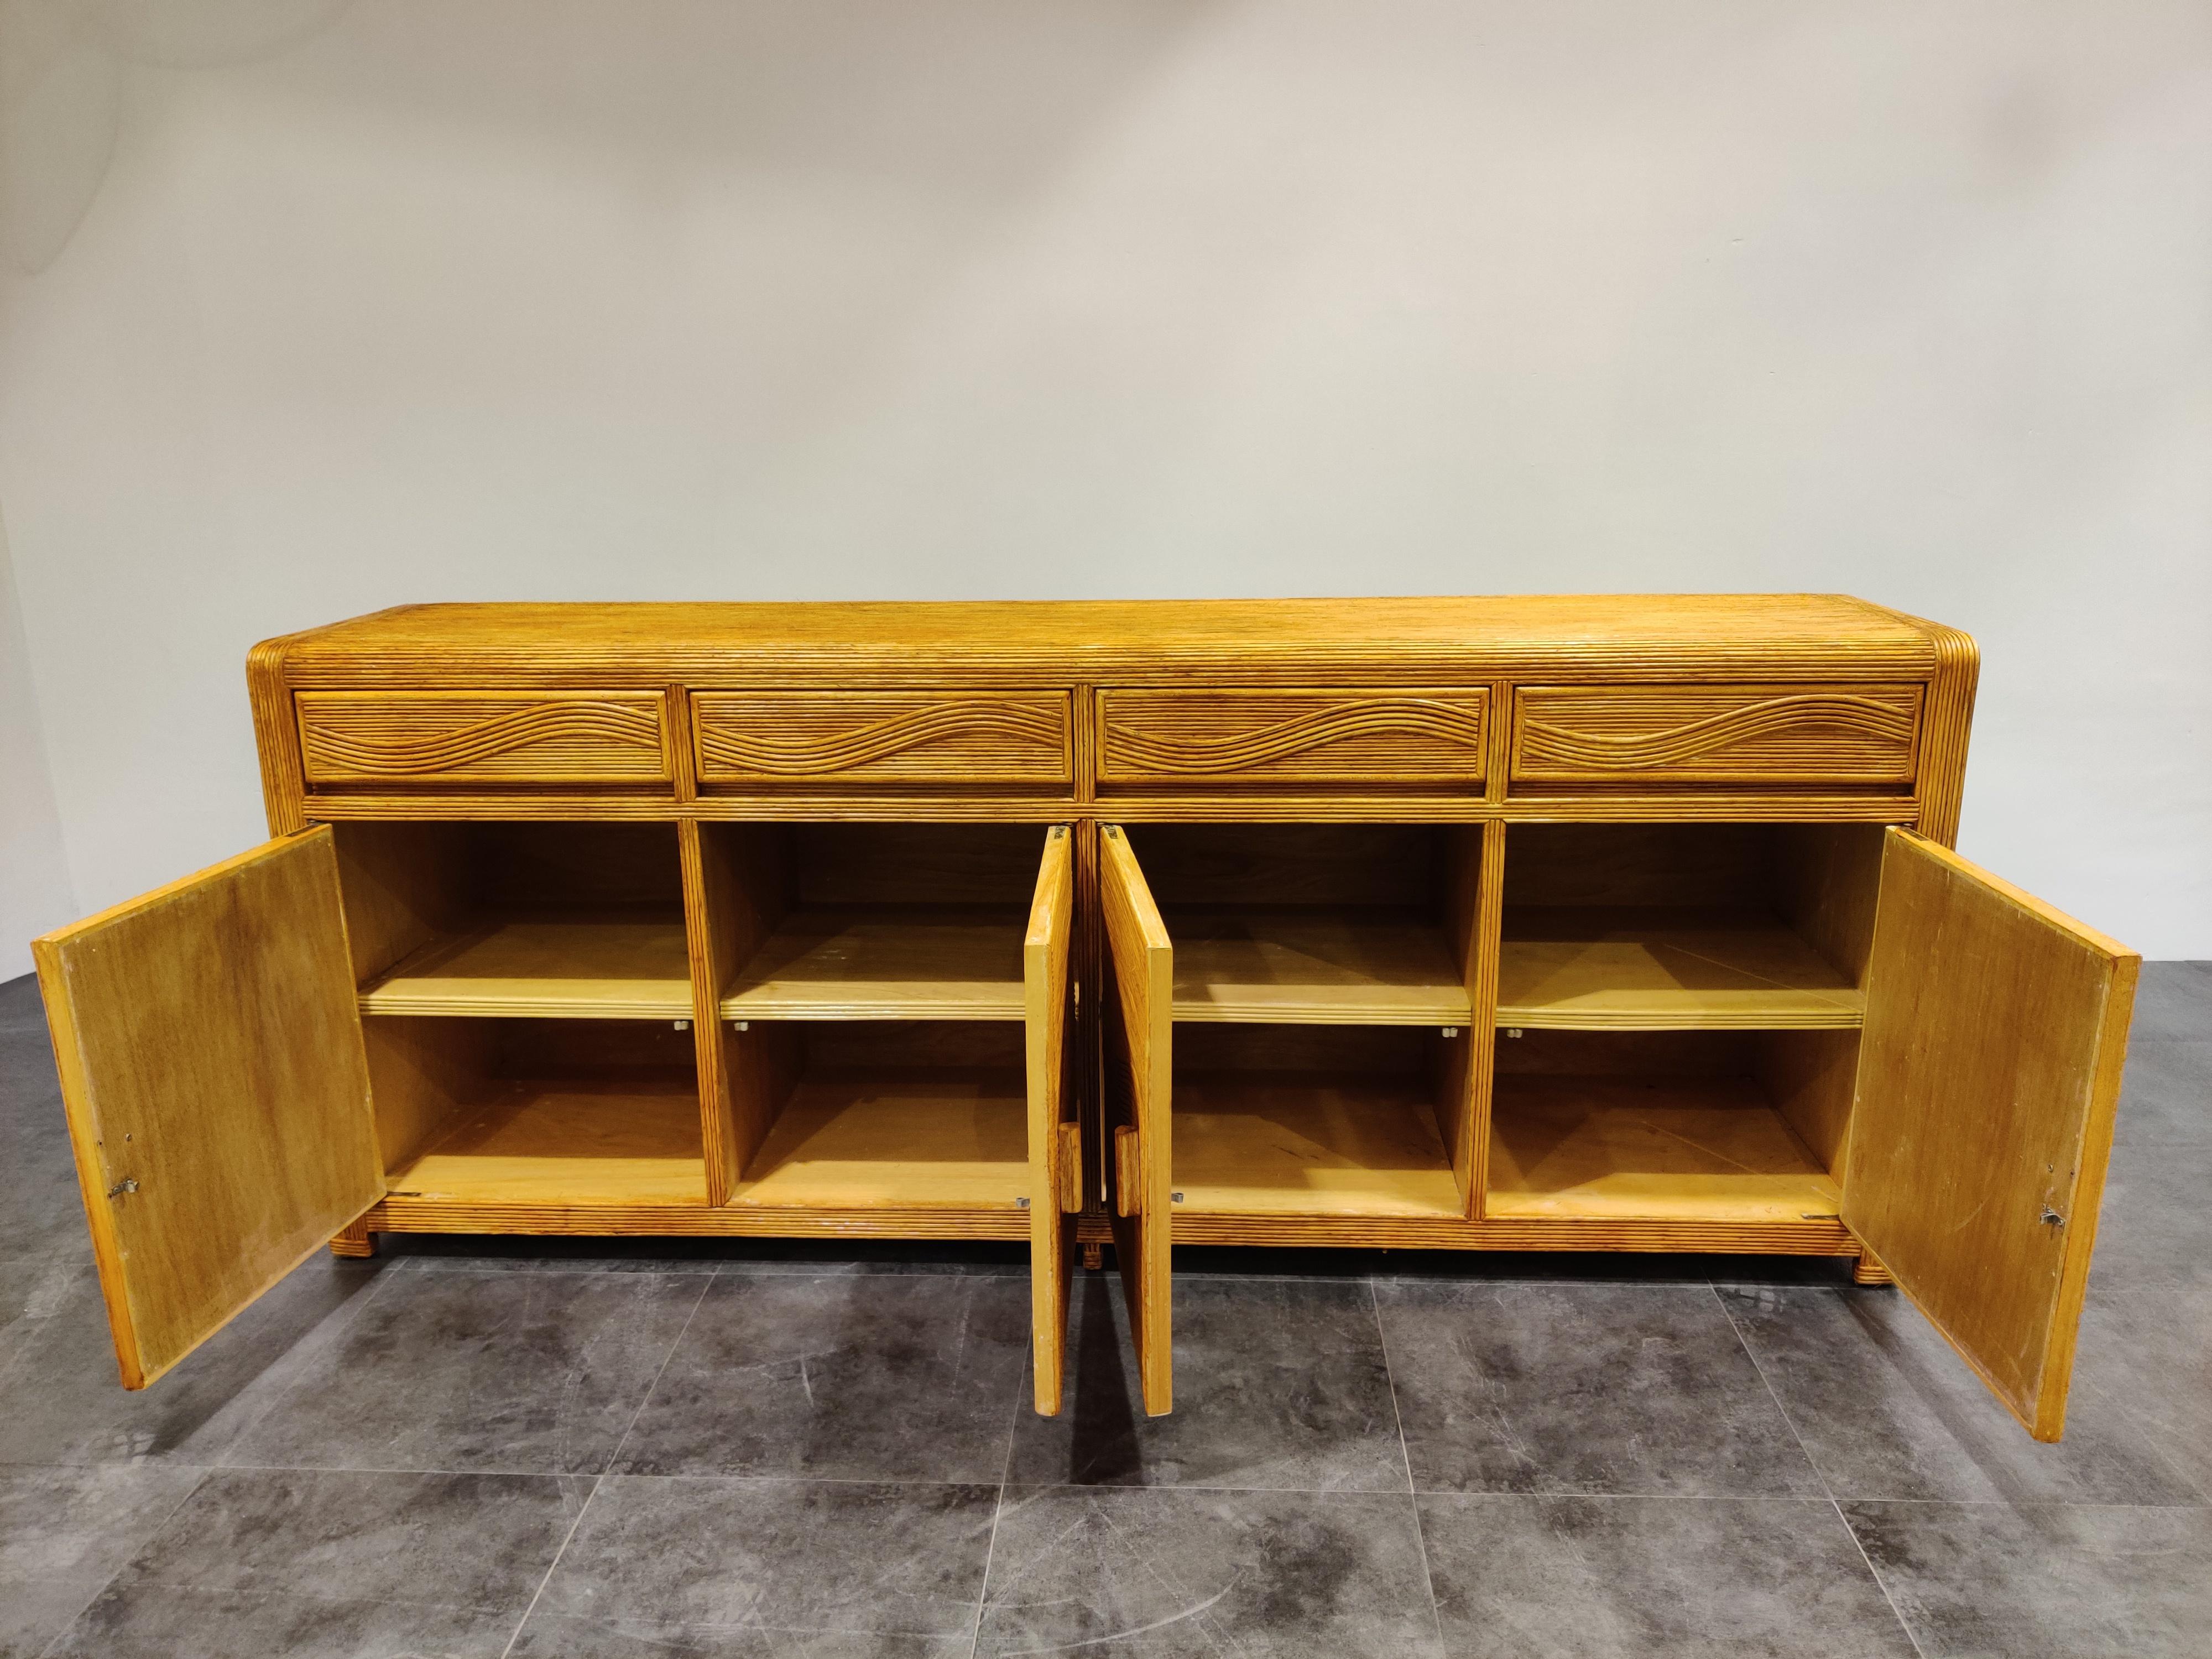 Elegant bamboo and rattan sideboard with four doors and drawers.

Beautiful rounded edge with a wave pattern in the doors and drawers.

Good condition.

1970s, France

Dimensions:

Length 220cm/86.61